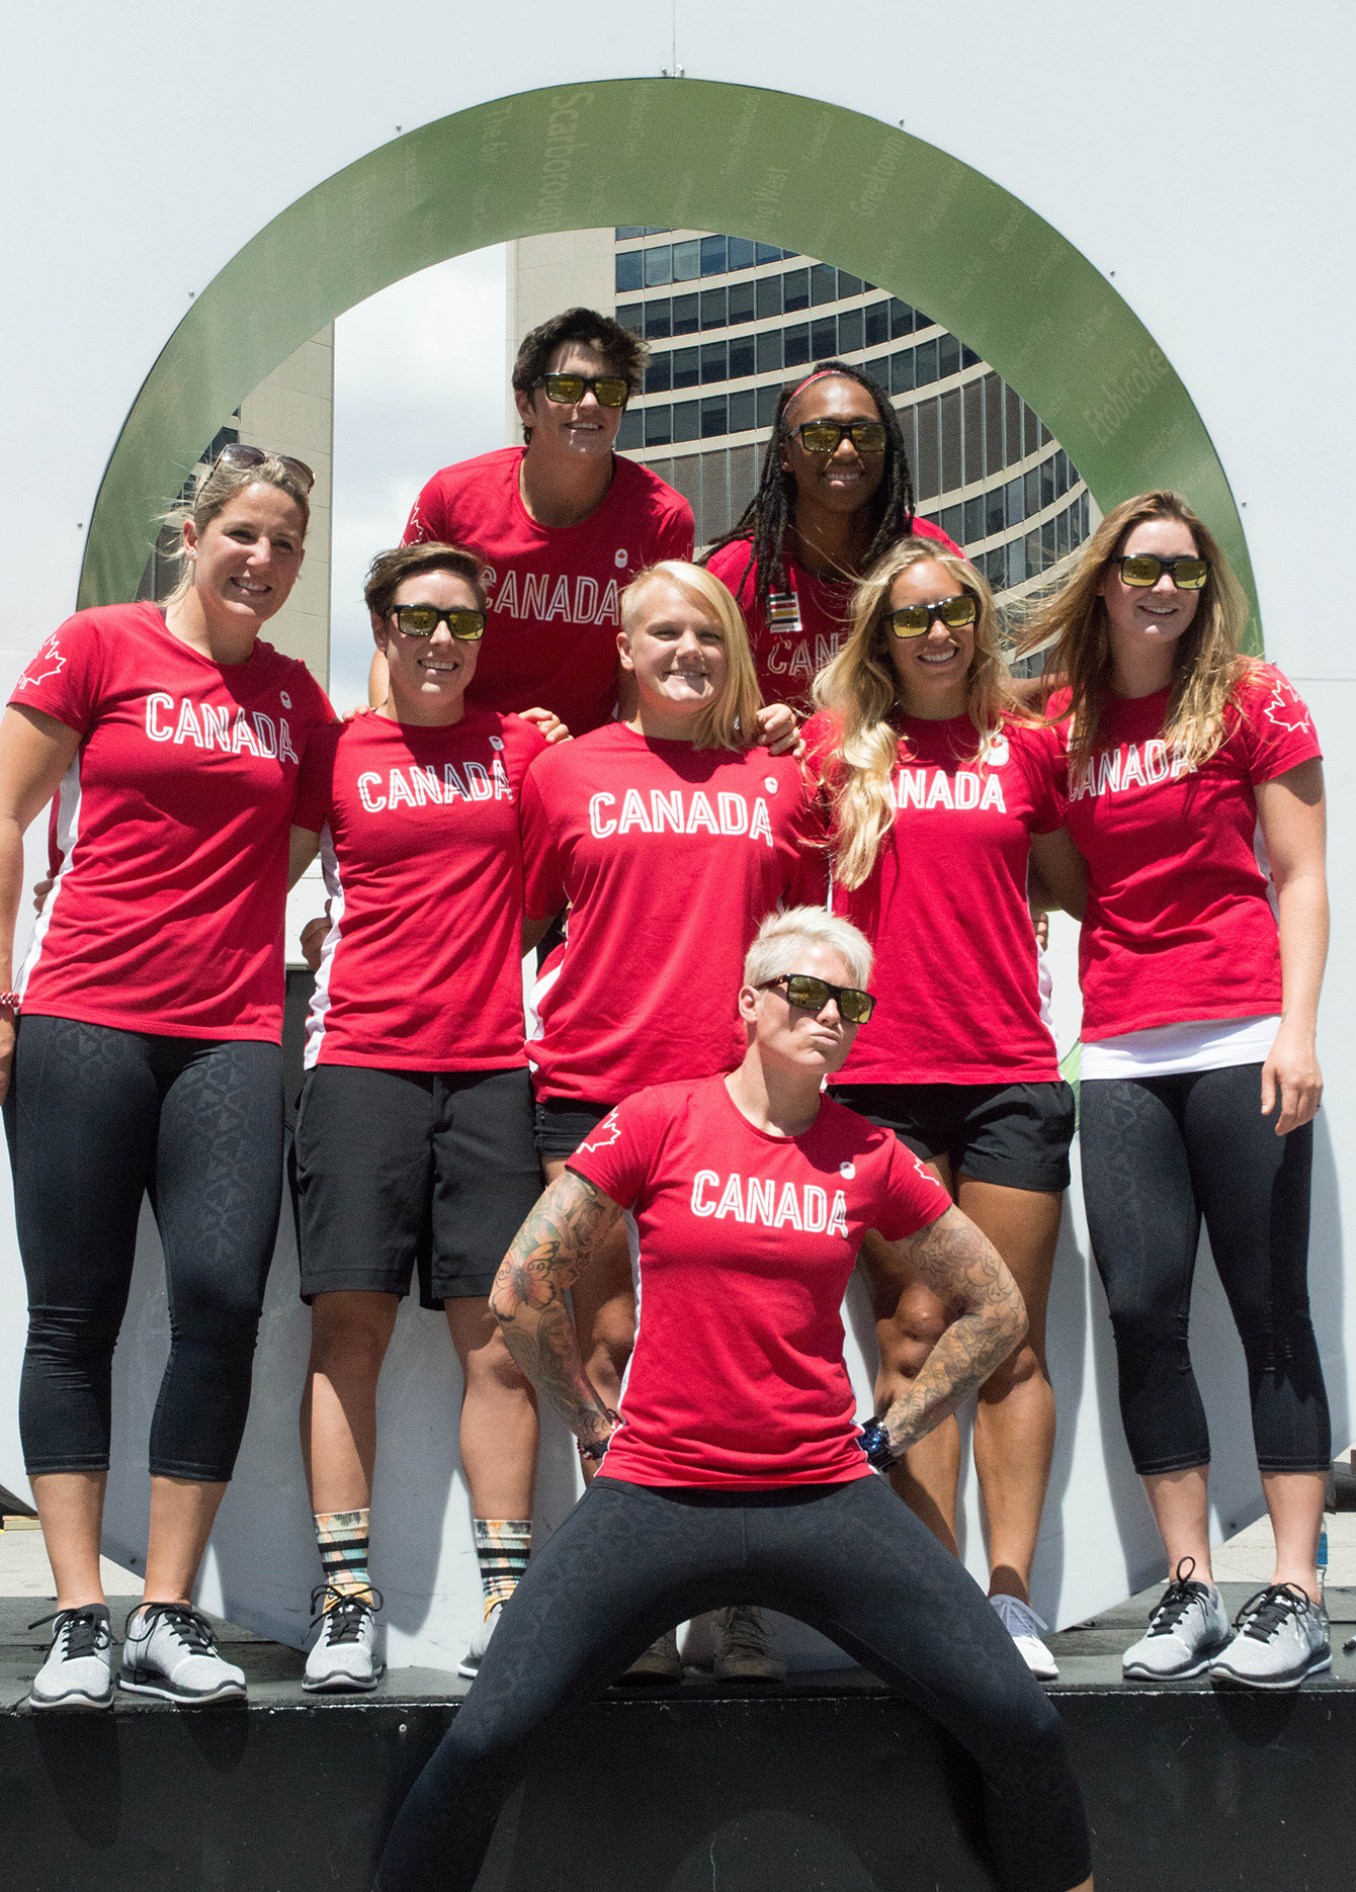 Some members of the rugby team posing in front of the "Toronto" sign at Nathan Phillips Square on July 26, 2016. (Tavia Bakowski/COC)